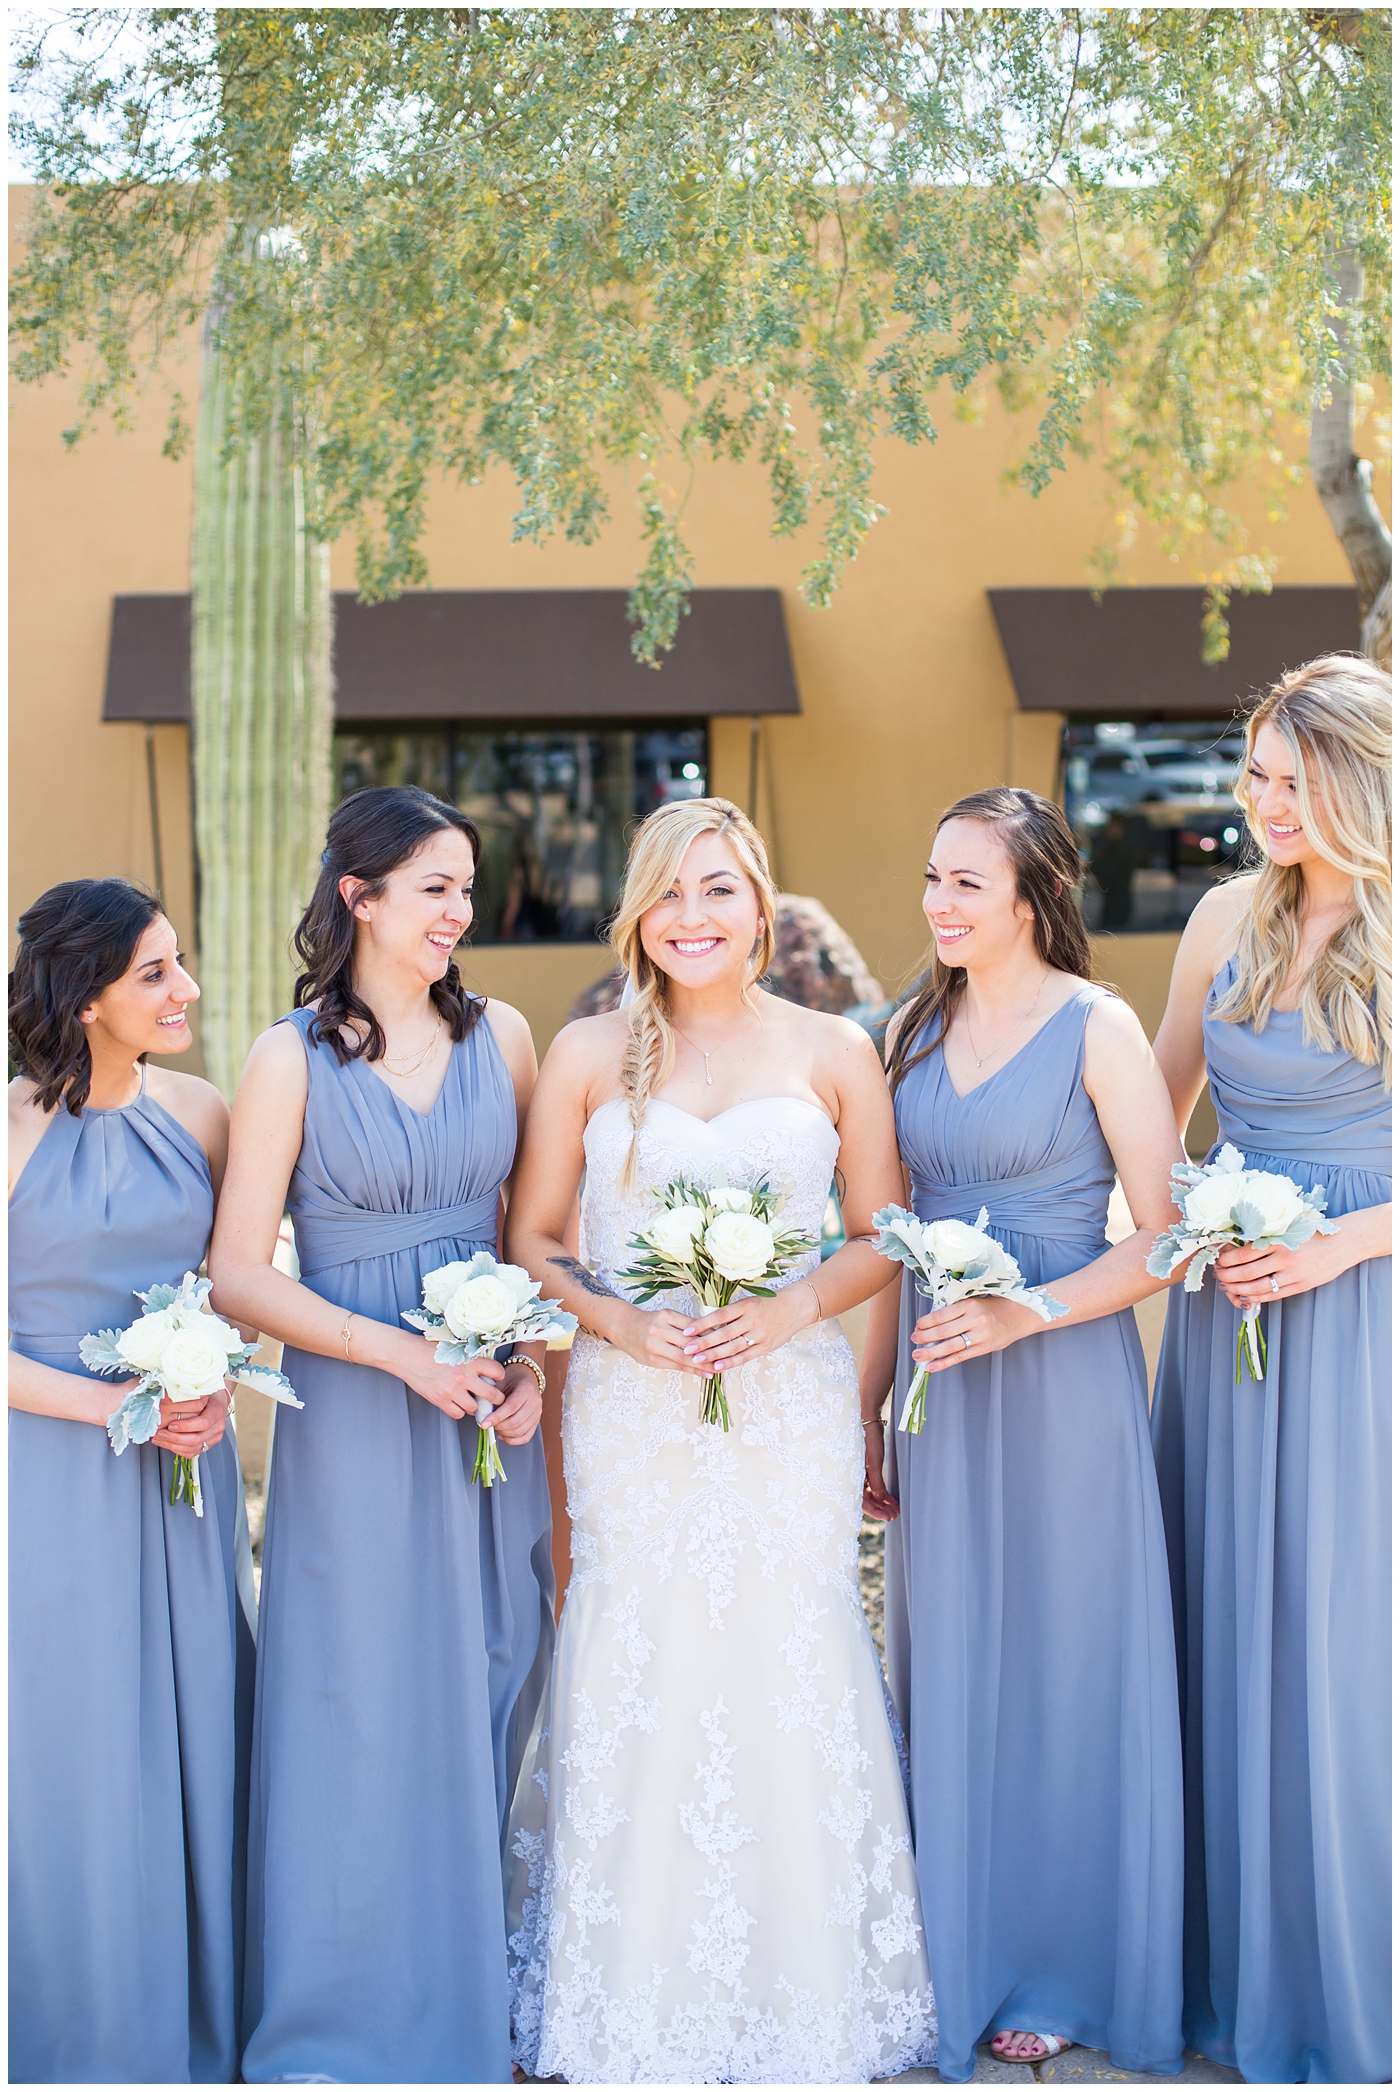 bride with fishtail braid and strapless dress with white rose and greenery bouquet with bridesmaids in slate gray long dresses getting ready on wedding day